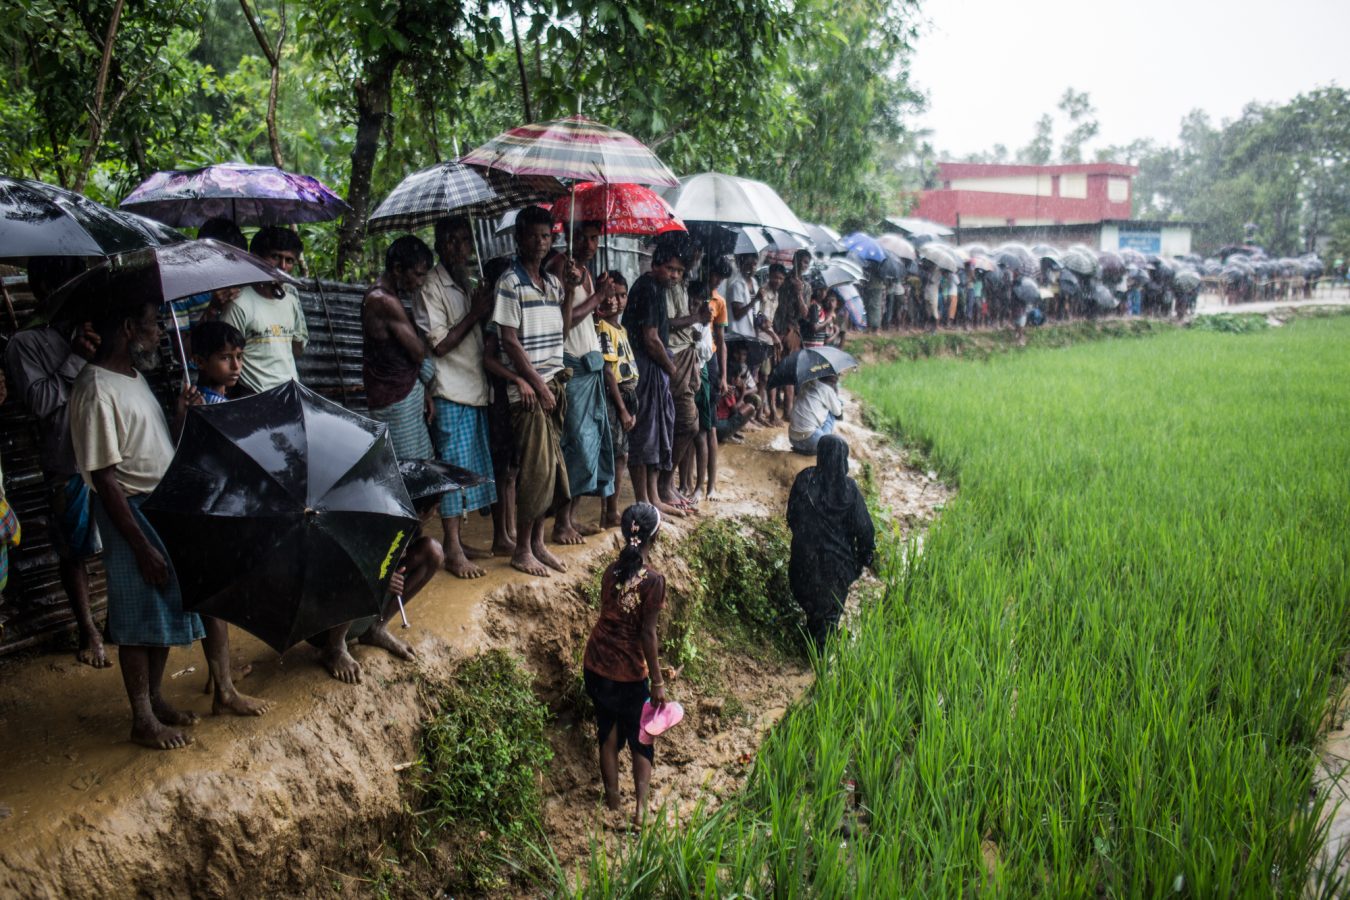 a long line of people standing in a lush, wet field and mud, holding umbrellas